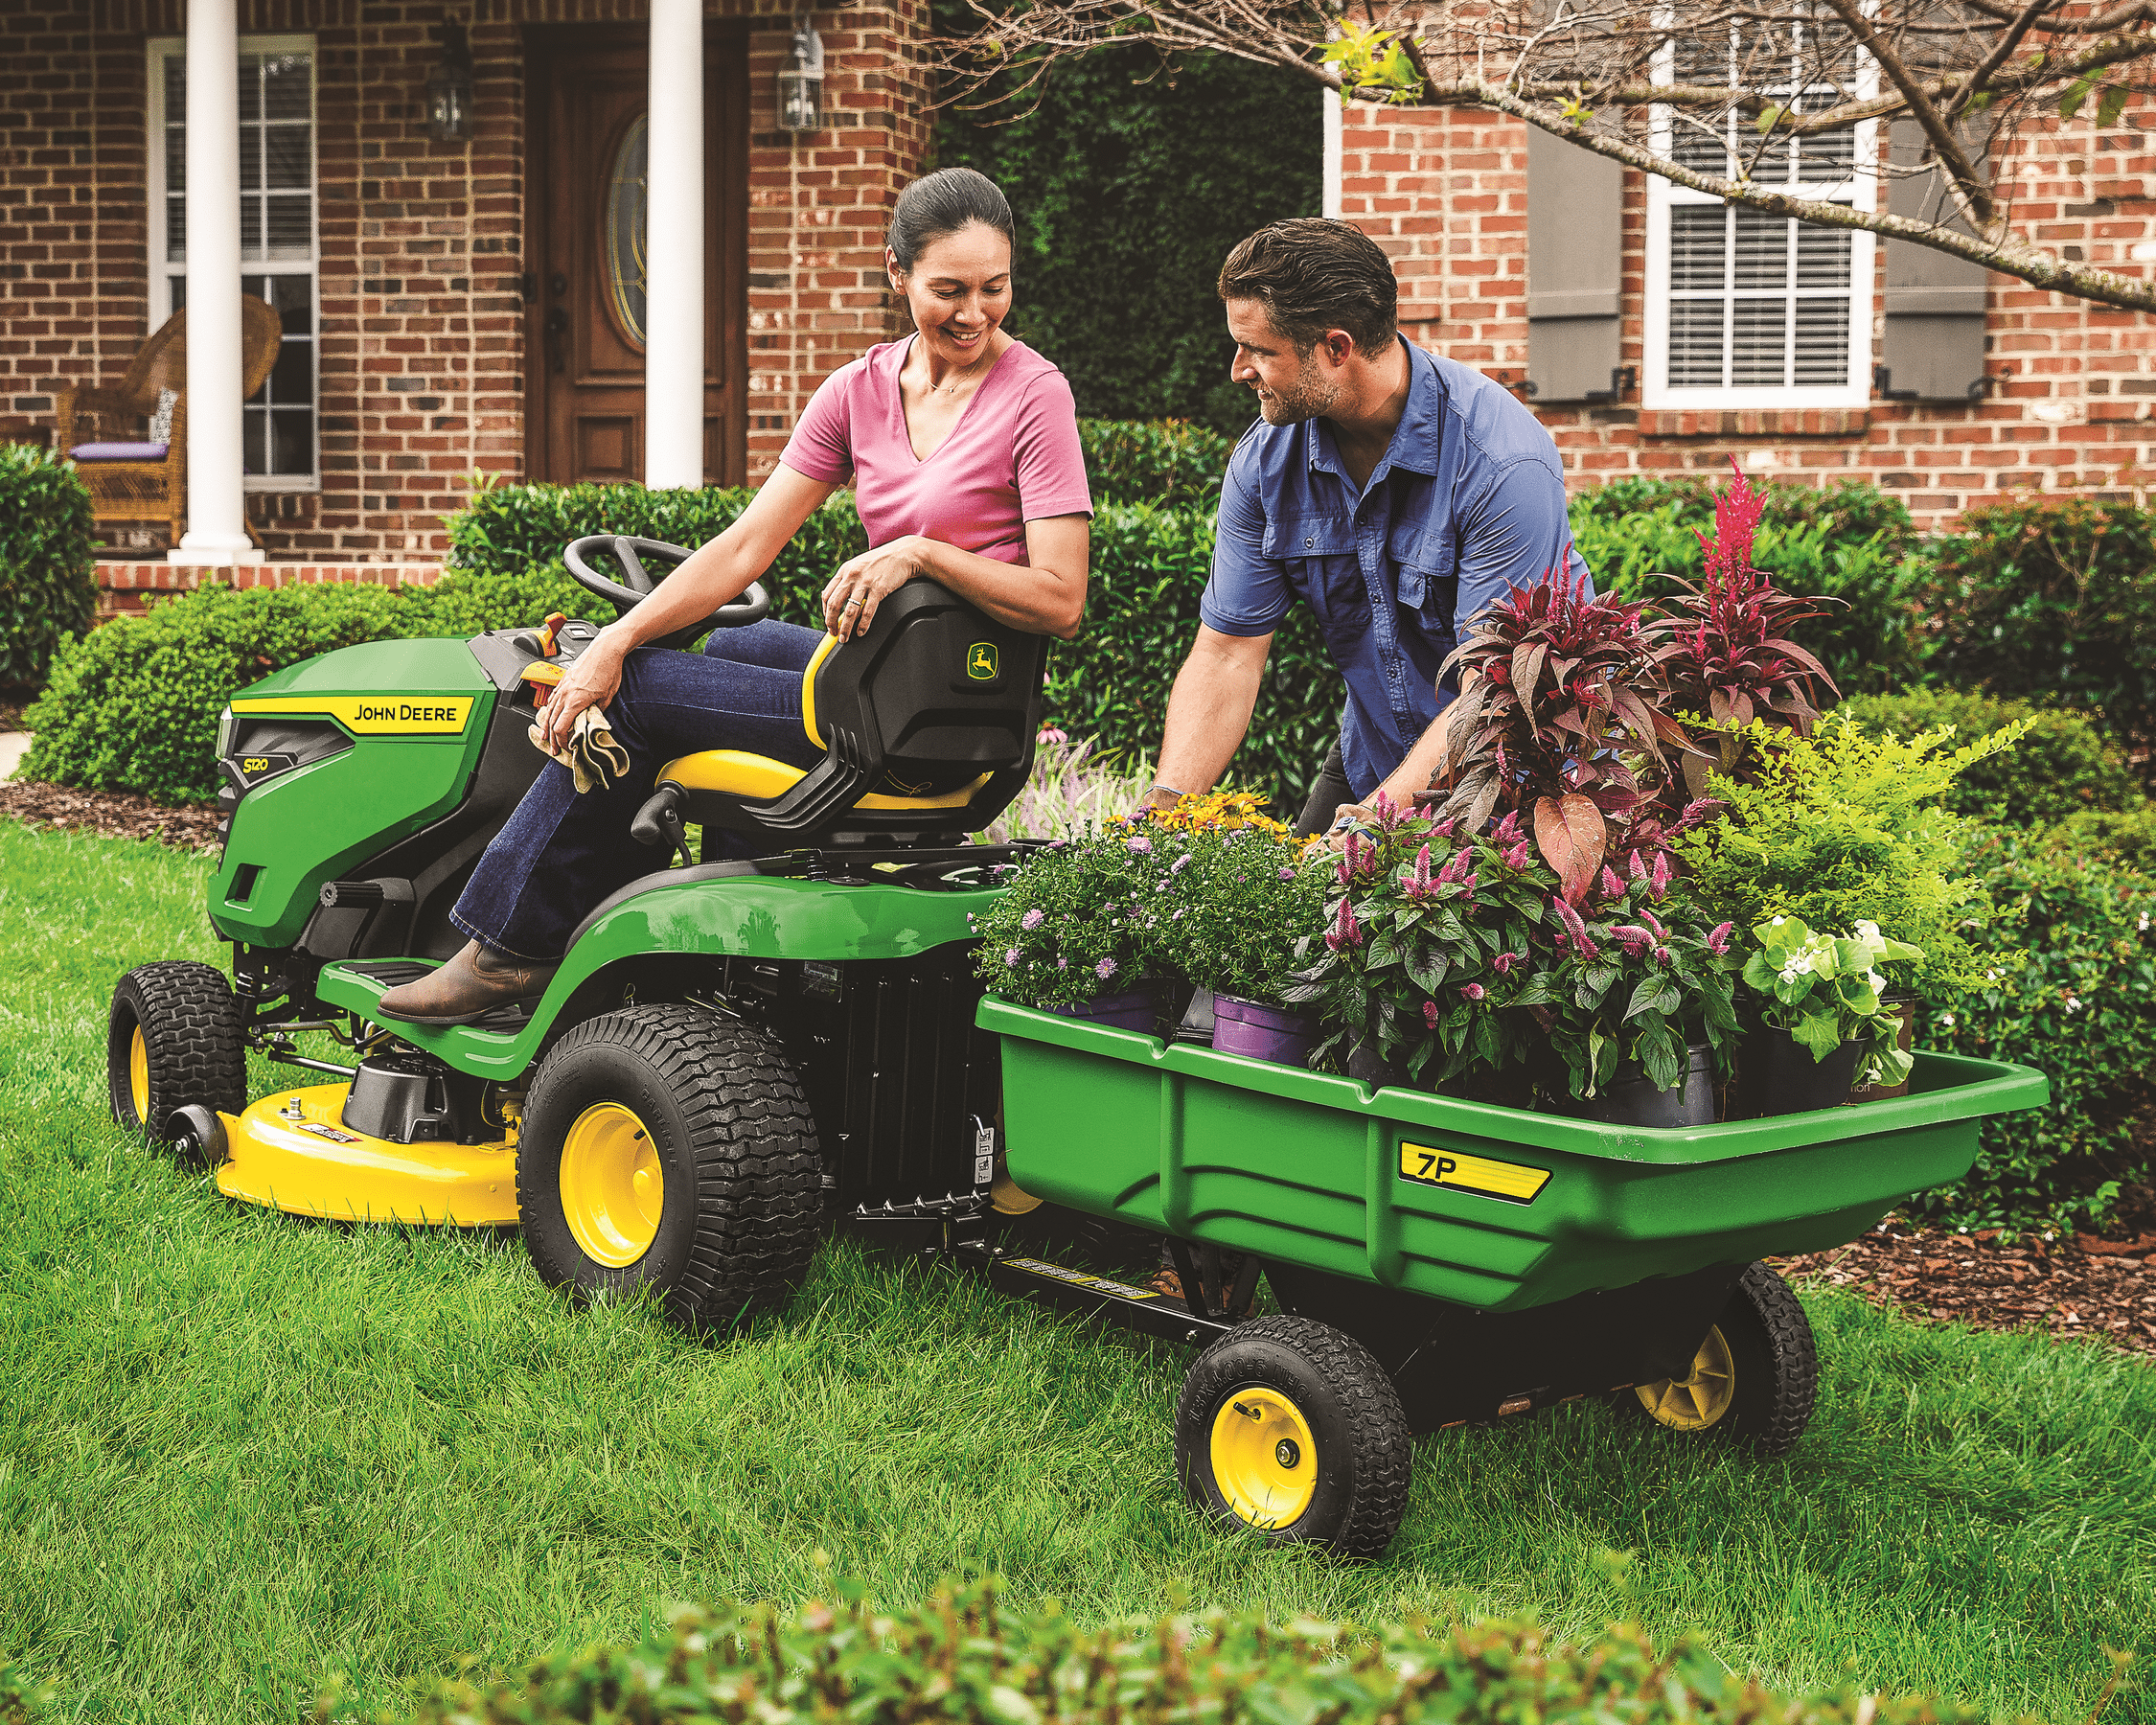 A couple is doing gardening work using a John Deere s120 lawn tractor with 7p cart. 